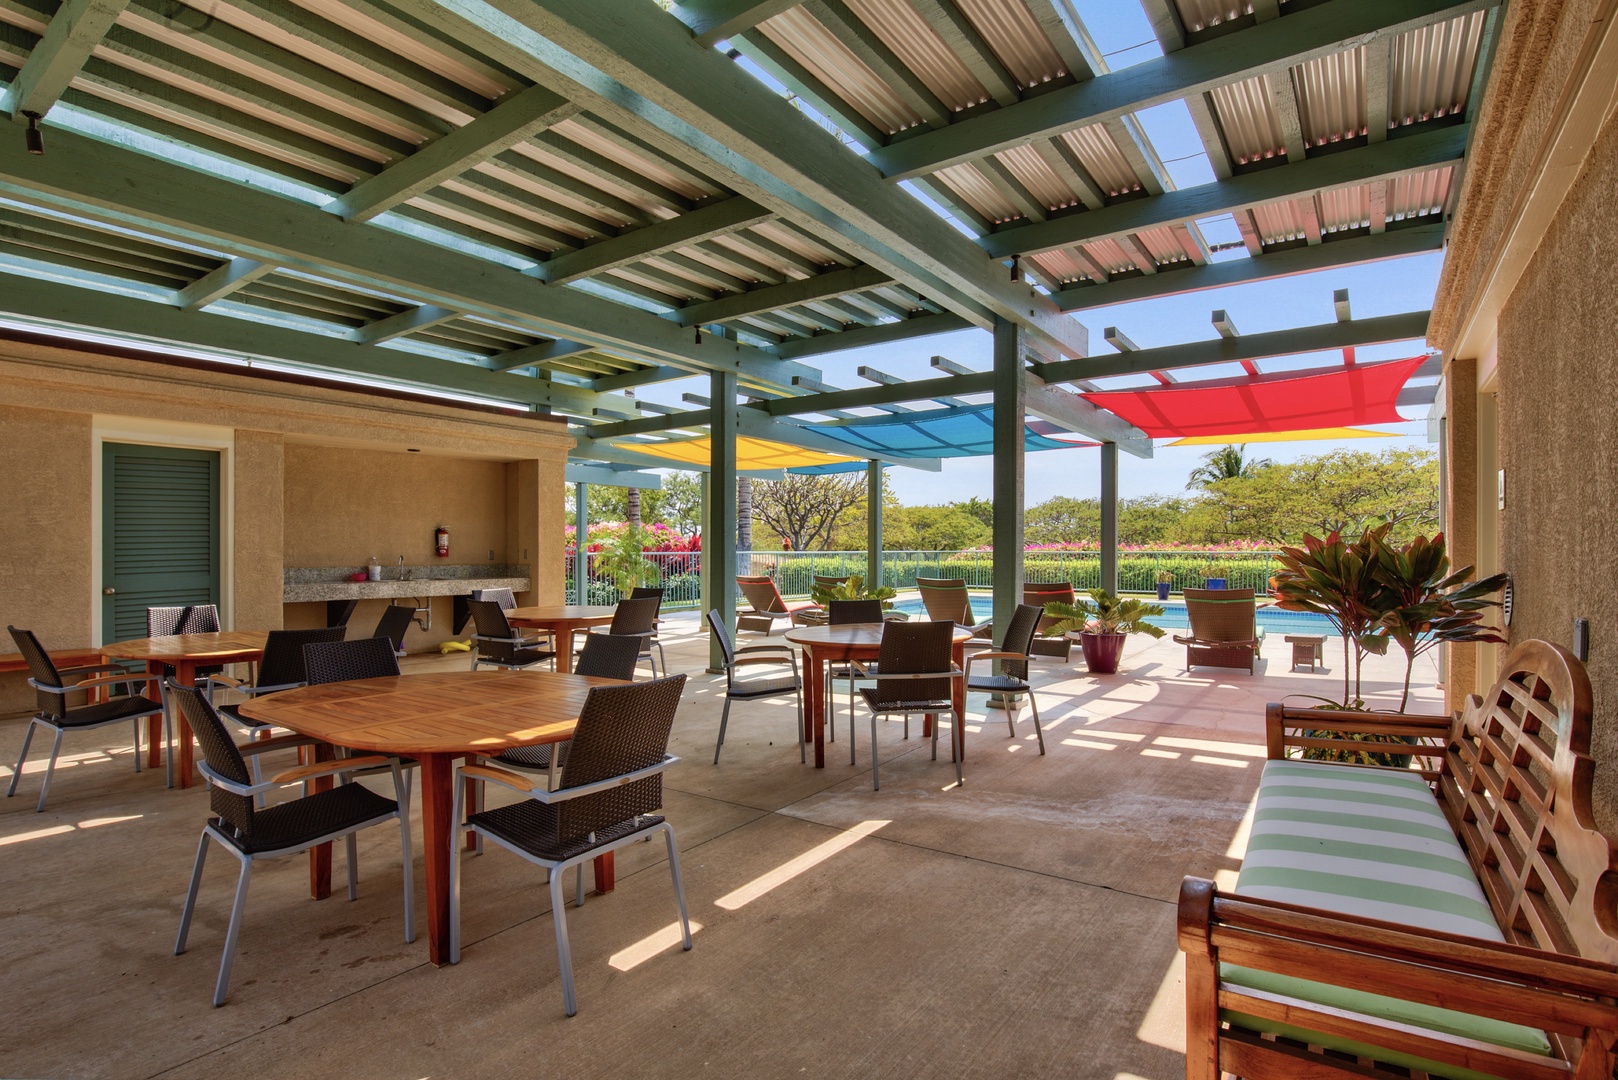 Kamuela Vacation Rentals, Kumulani I-1 - There are additional BBQ's here for your use as well as seating areas and restrooms.